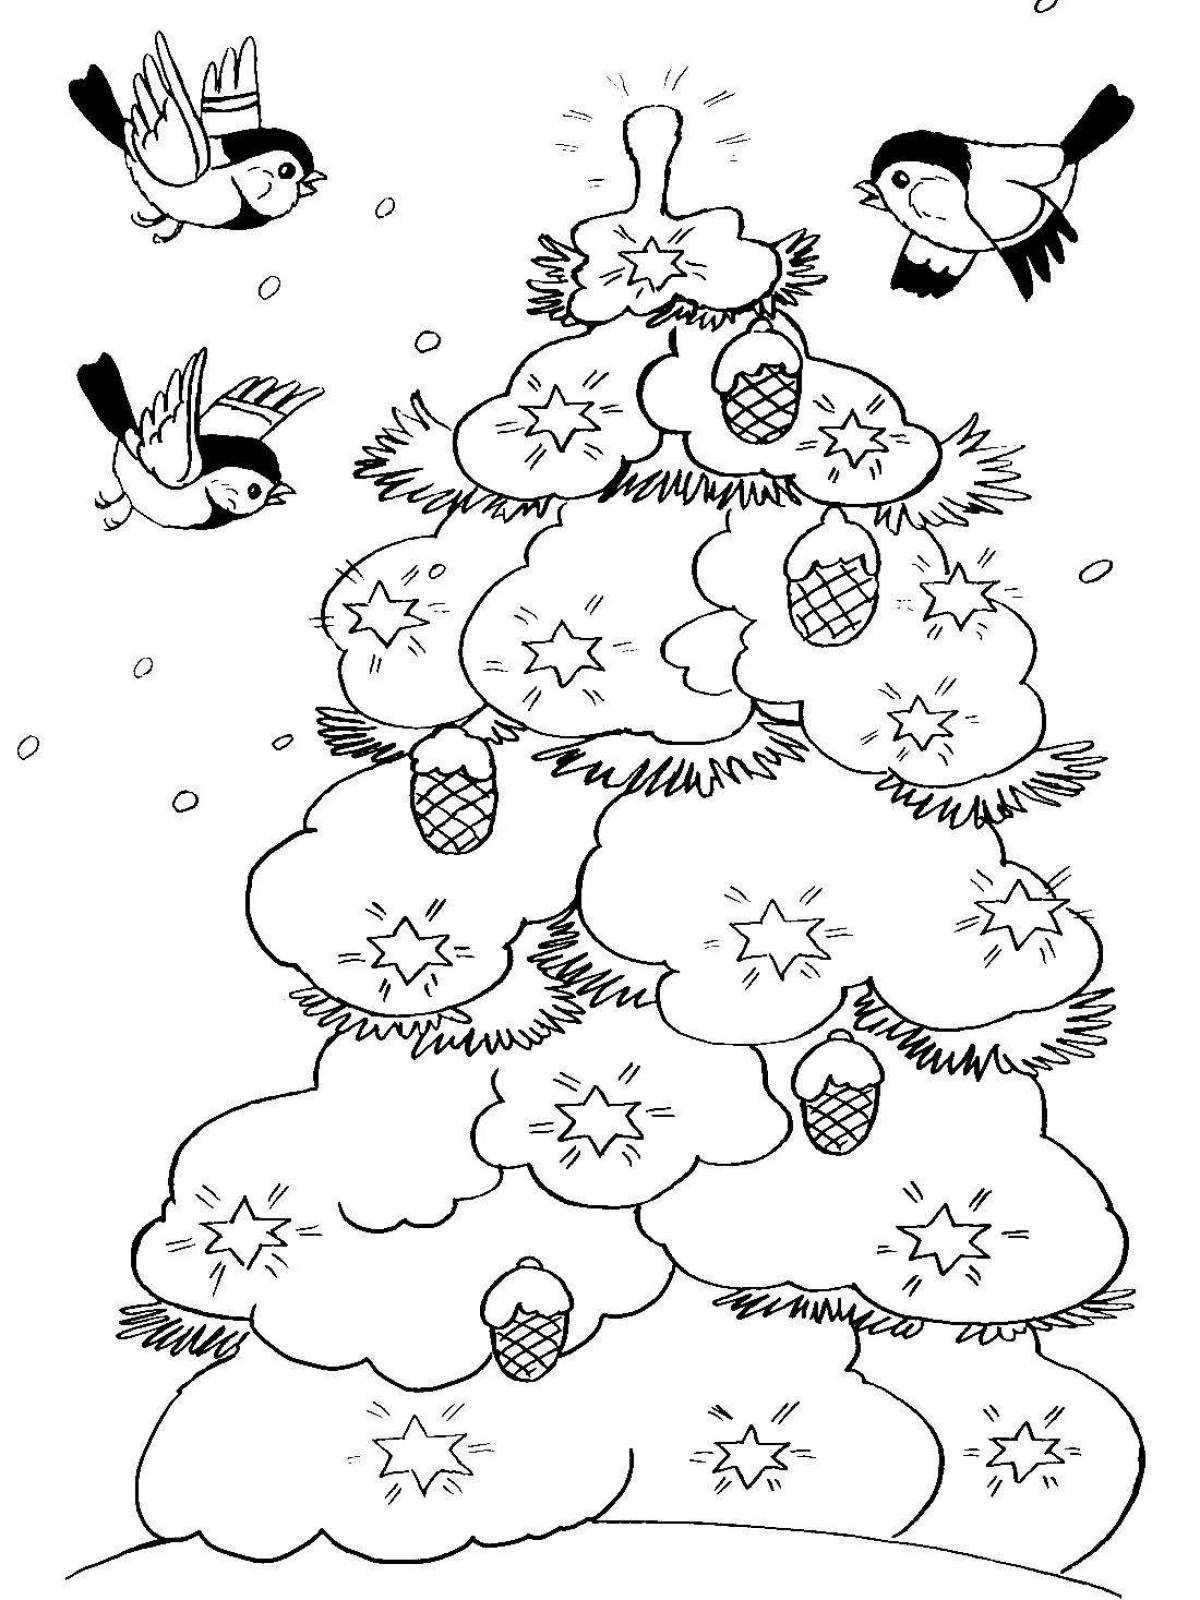 Vibrant winter forest coloring pages for kids